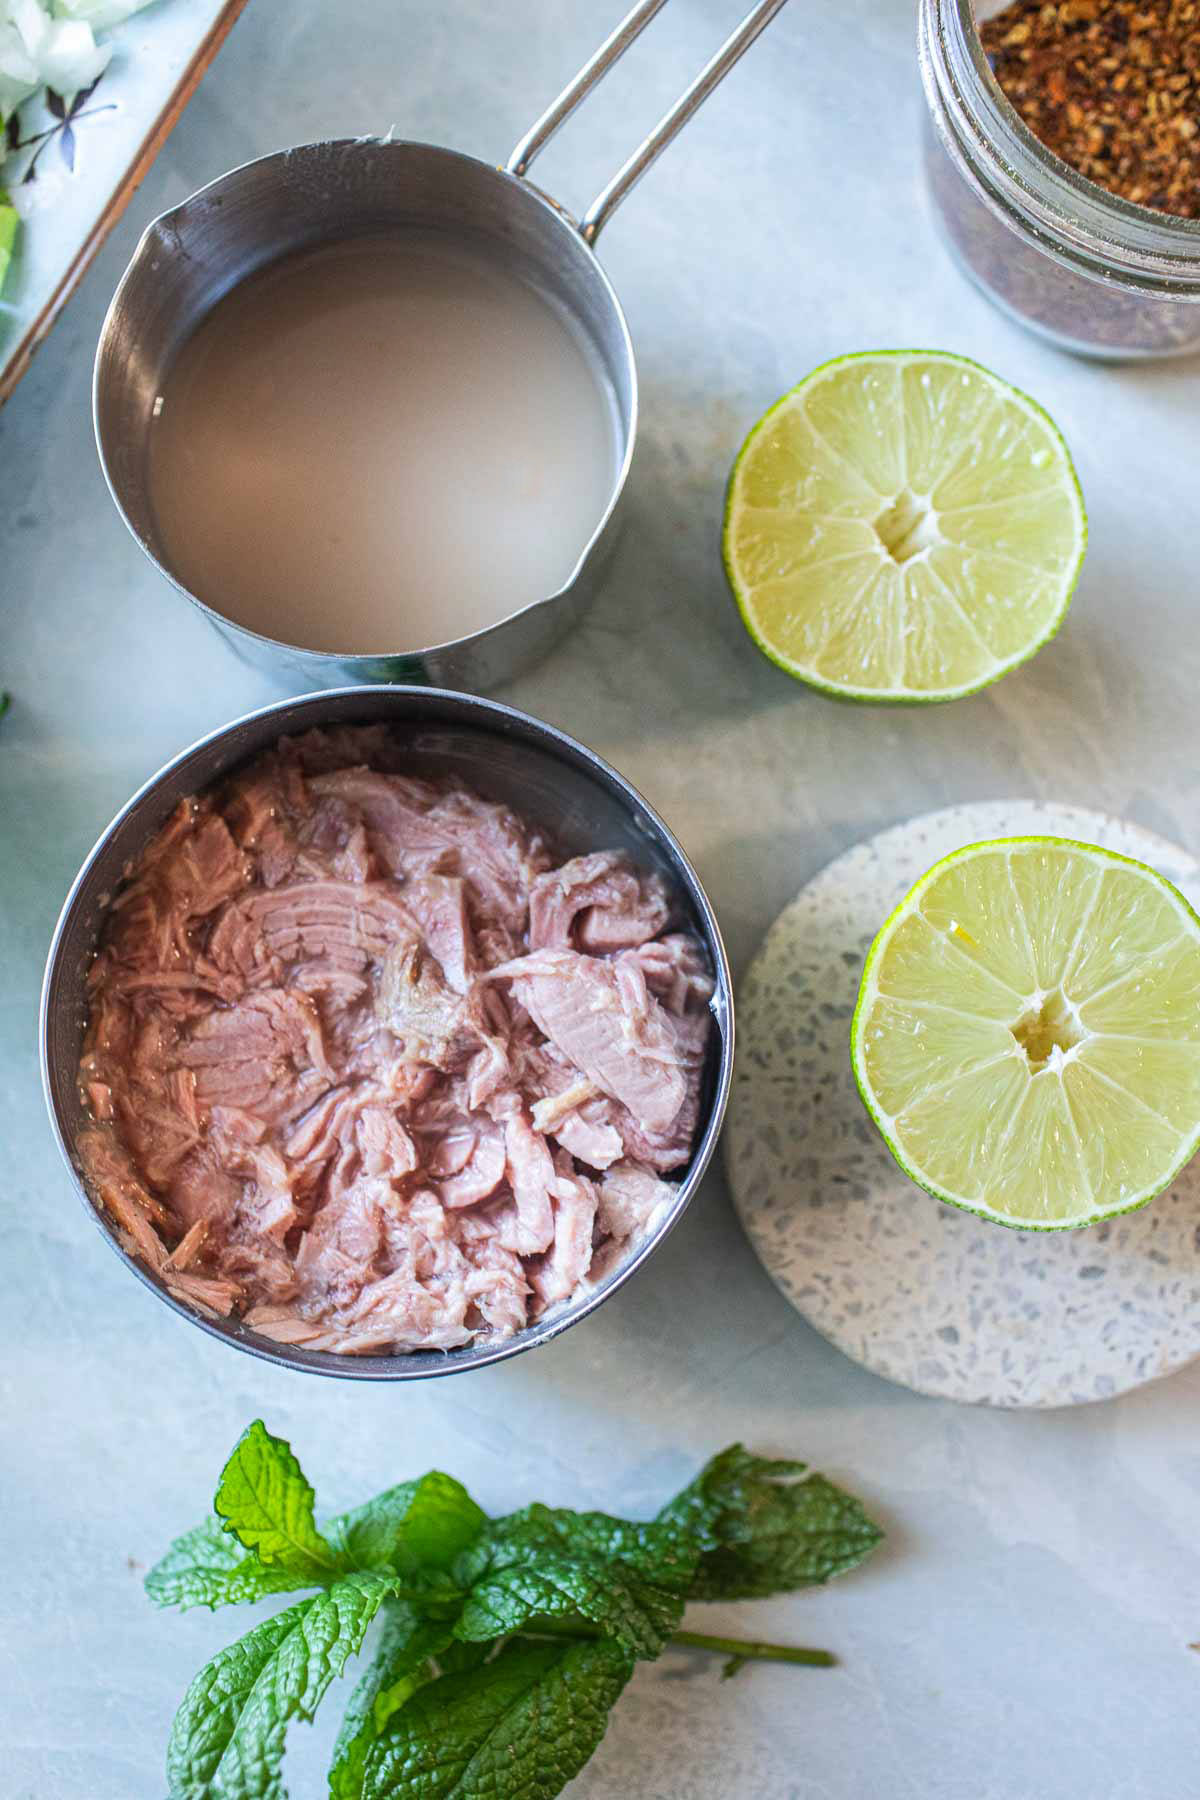 Canned tuna on the table with lime slices.